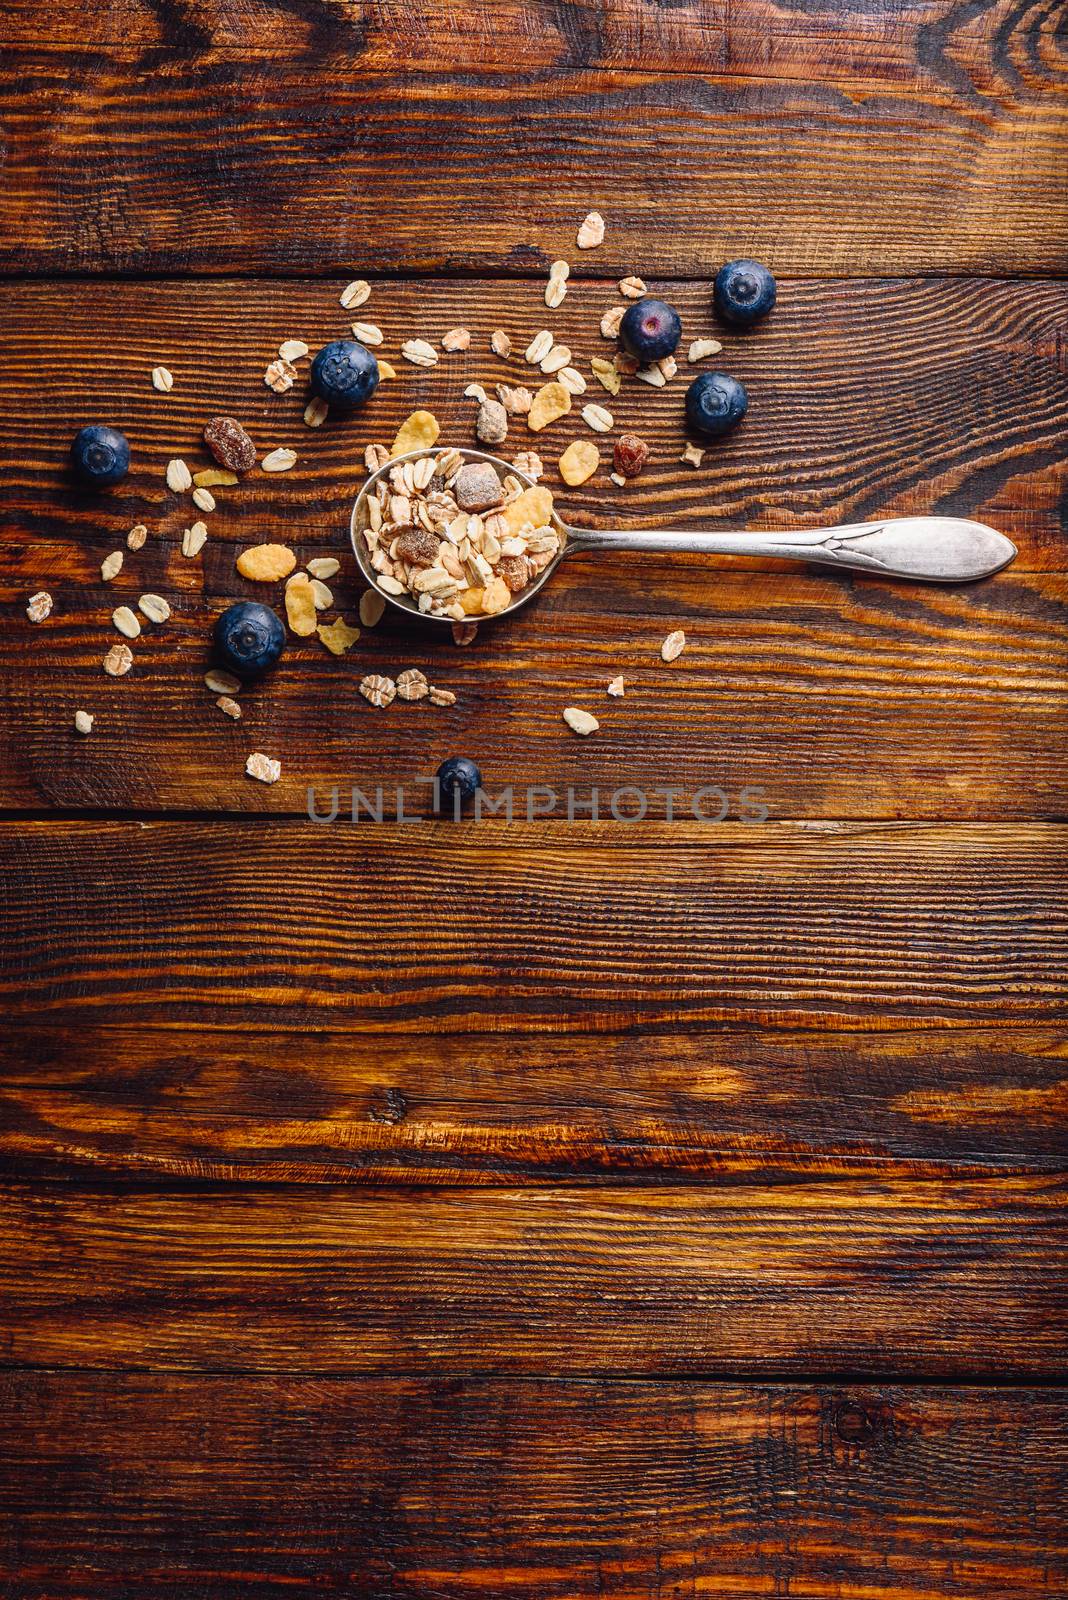 Spoonful of Granola and Blueberry. by Seva_blsv